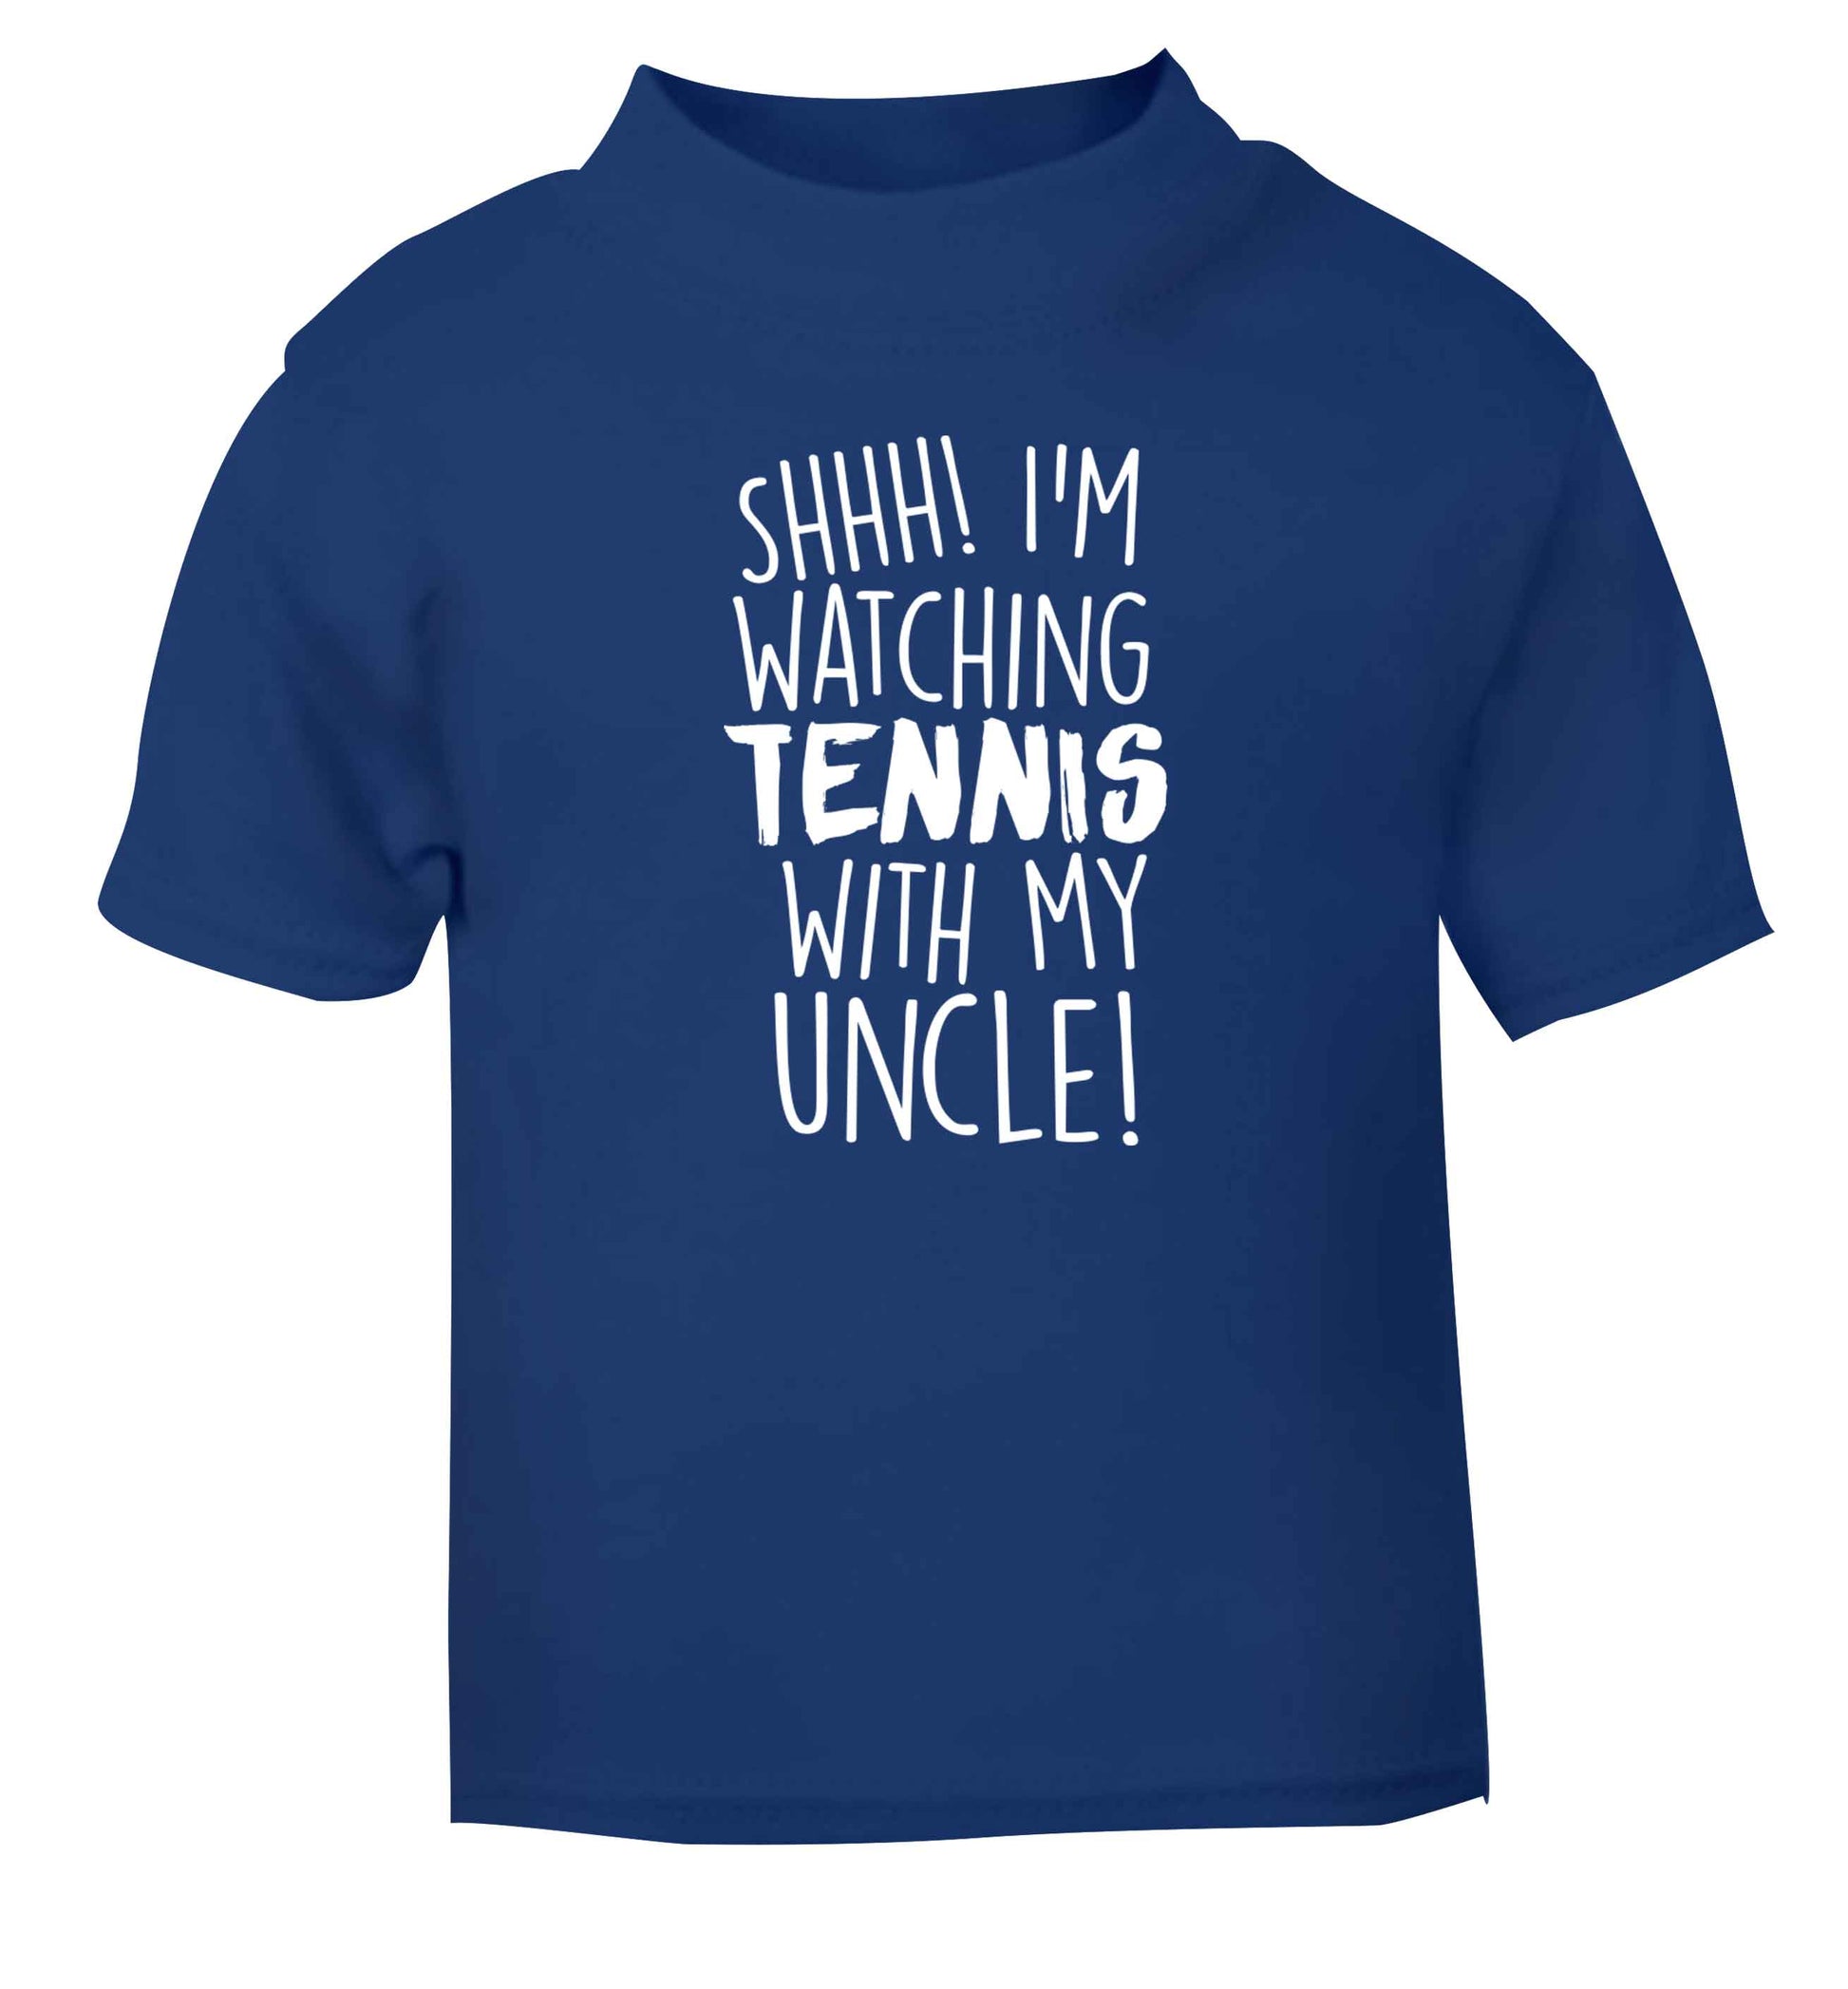 Shh! I'm watching tennis with my uncle! blue Baby Toddler Tshirt 2 Years